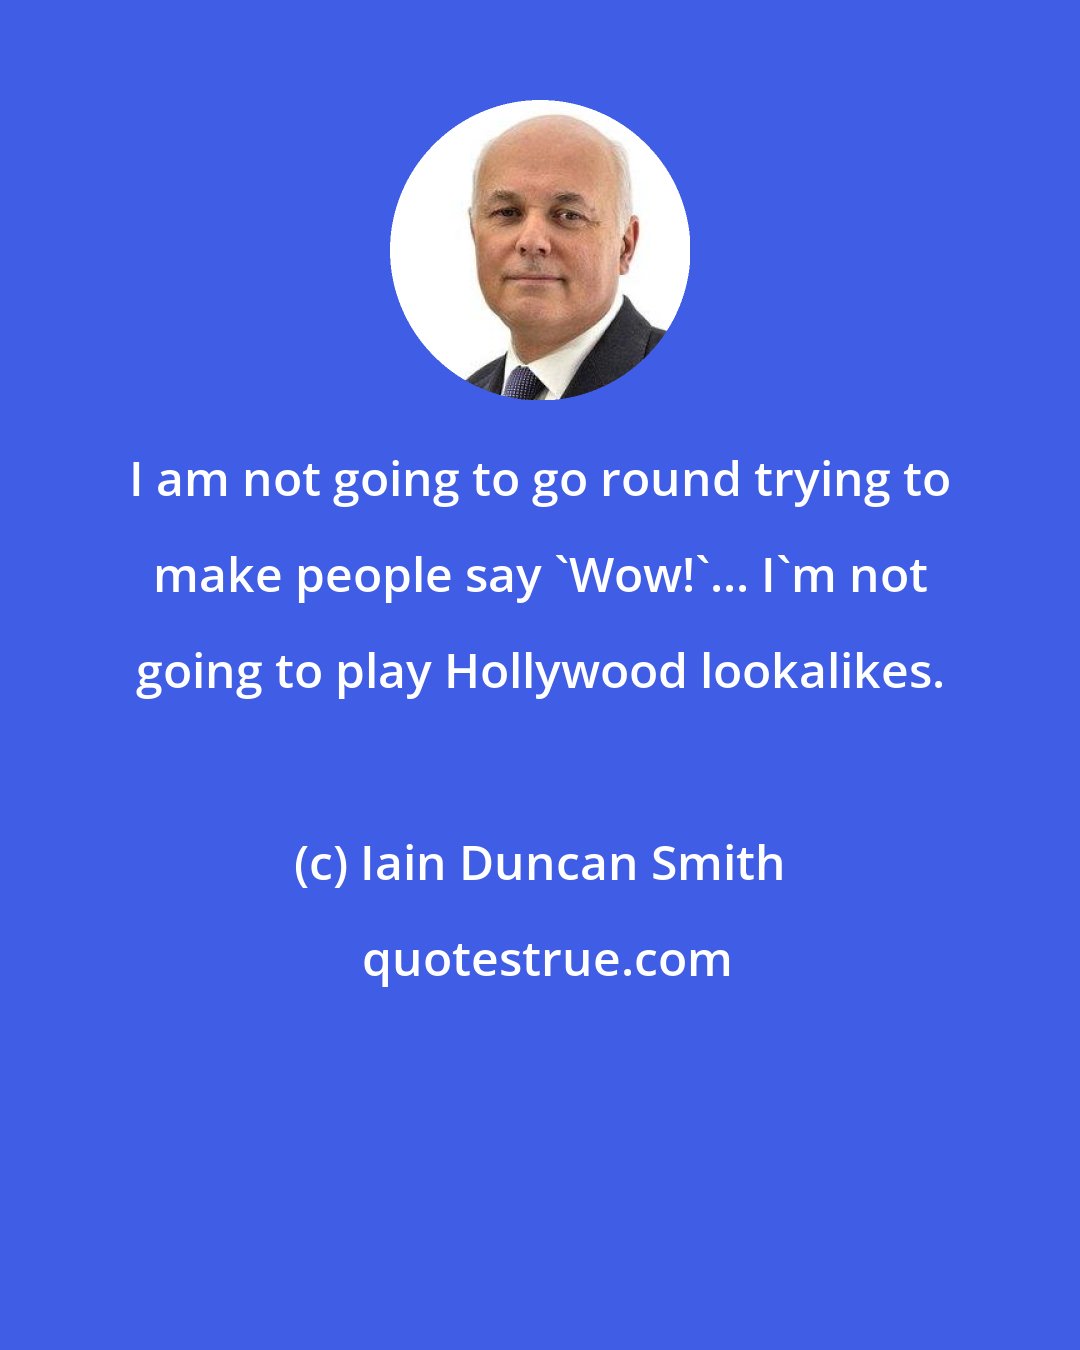 Iain Duncan Smith: I am not going to go round trying to make people say 'Wow!'... I'm not going to play Hollywood lookalikes.